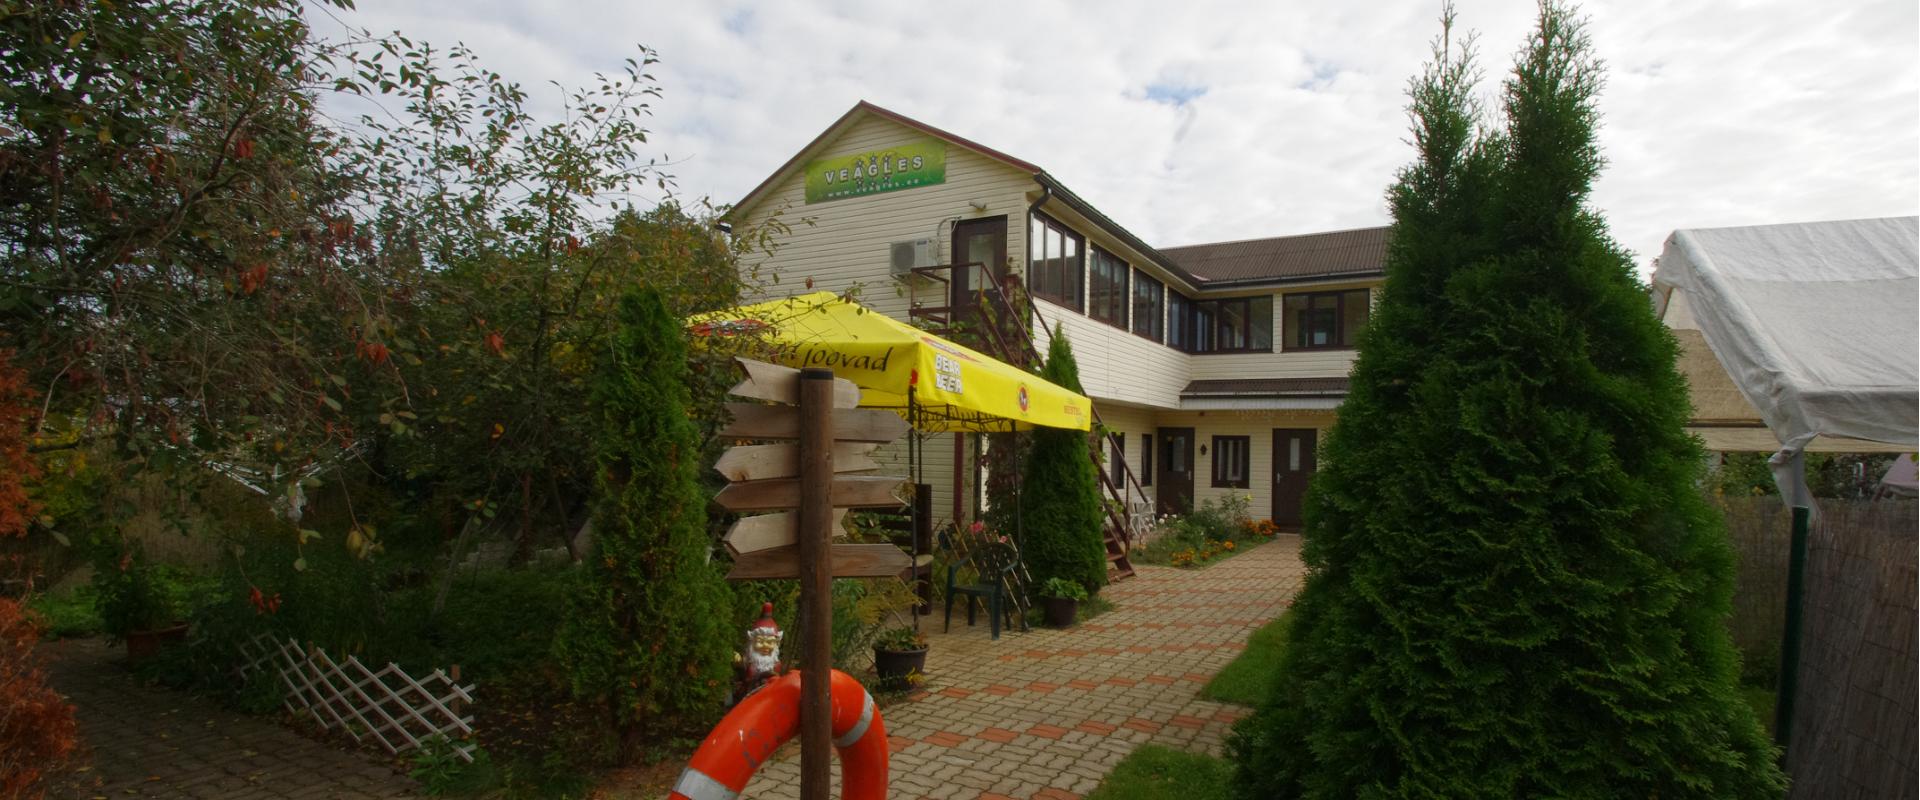 Veagles guesthouse